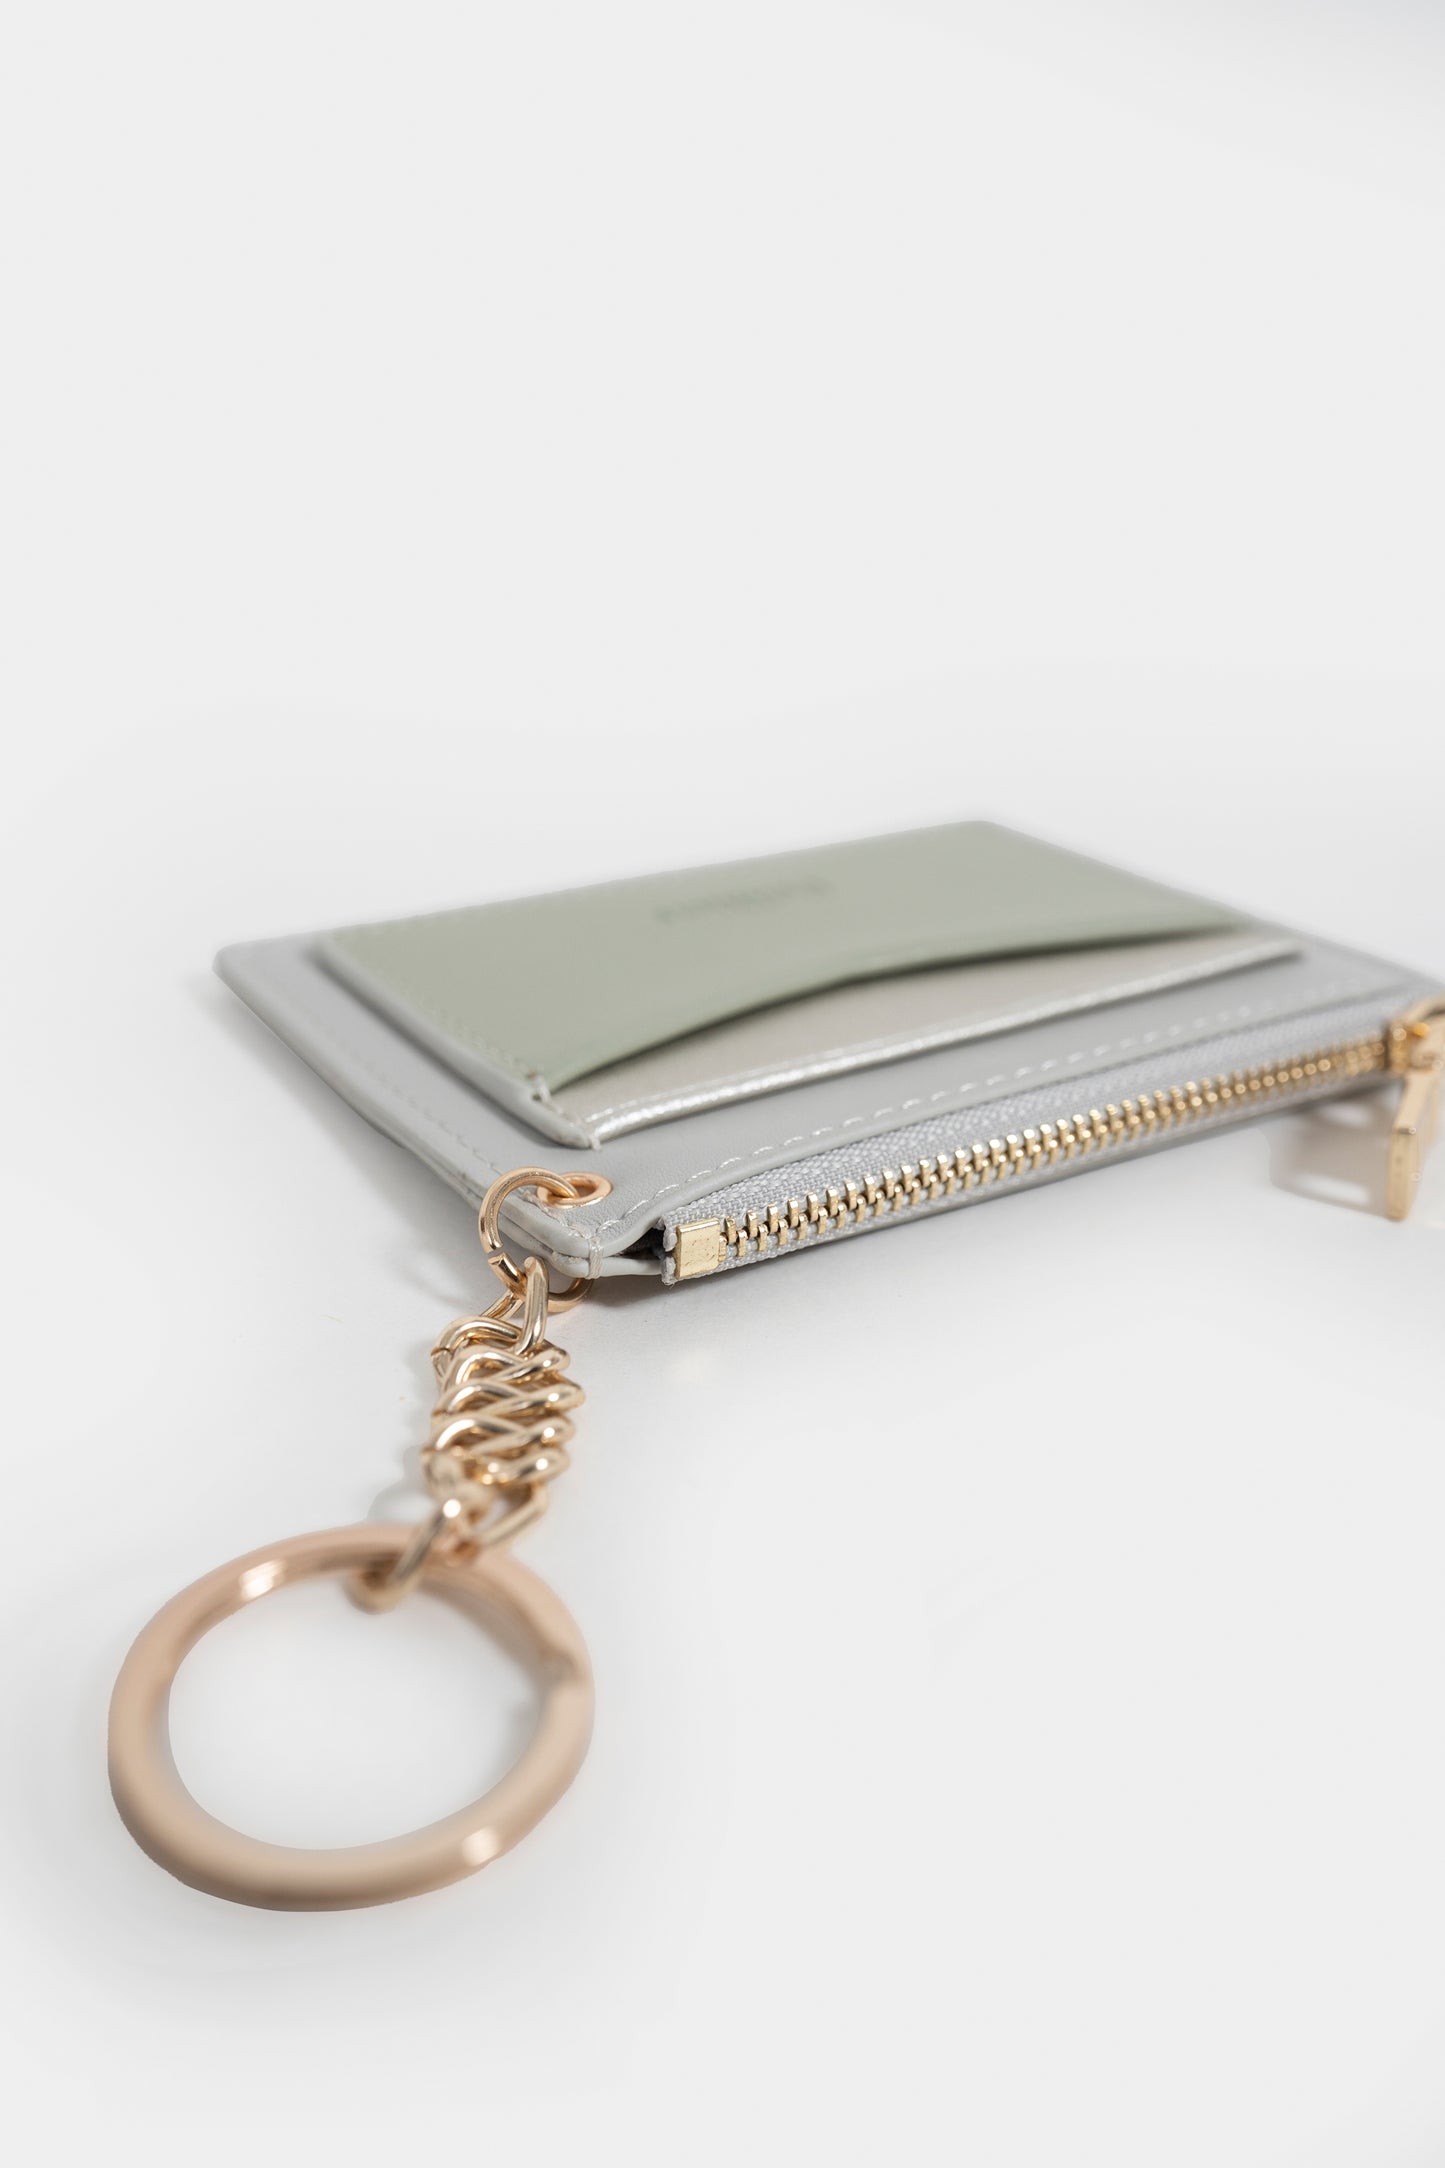 Two-Toned Card holder Keychain